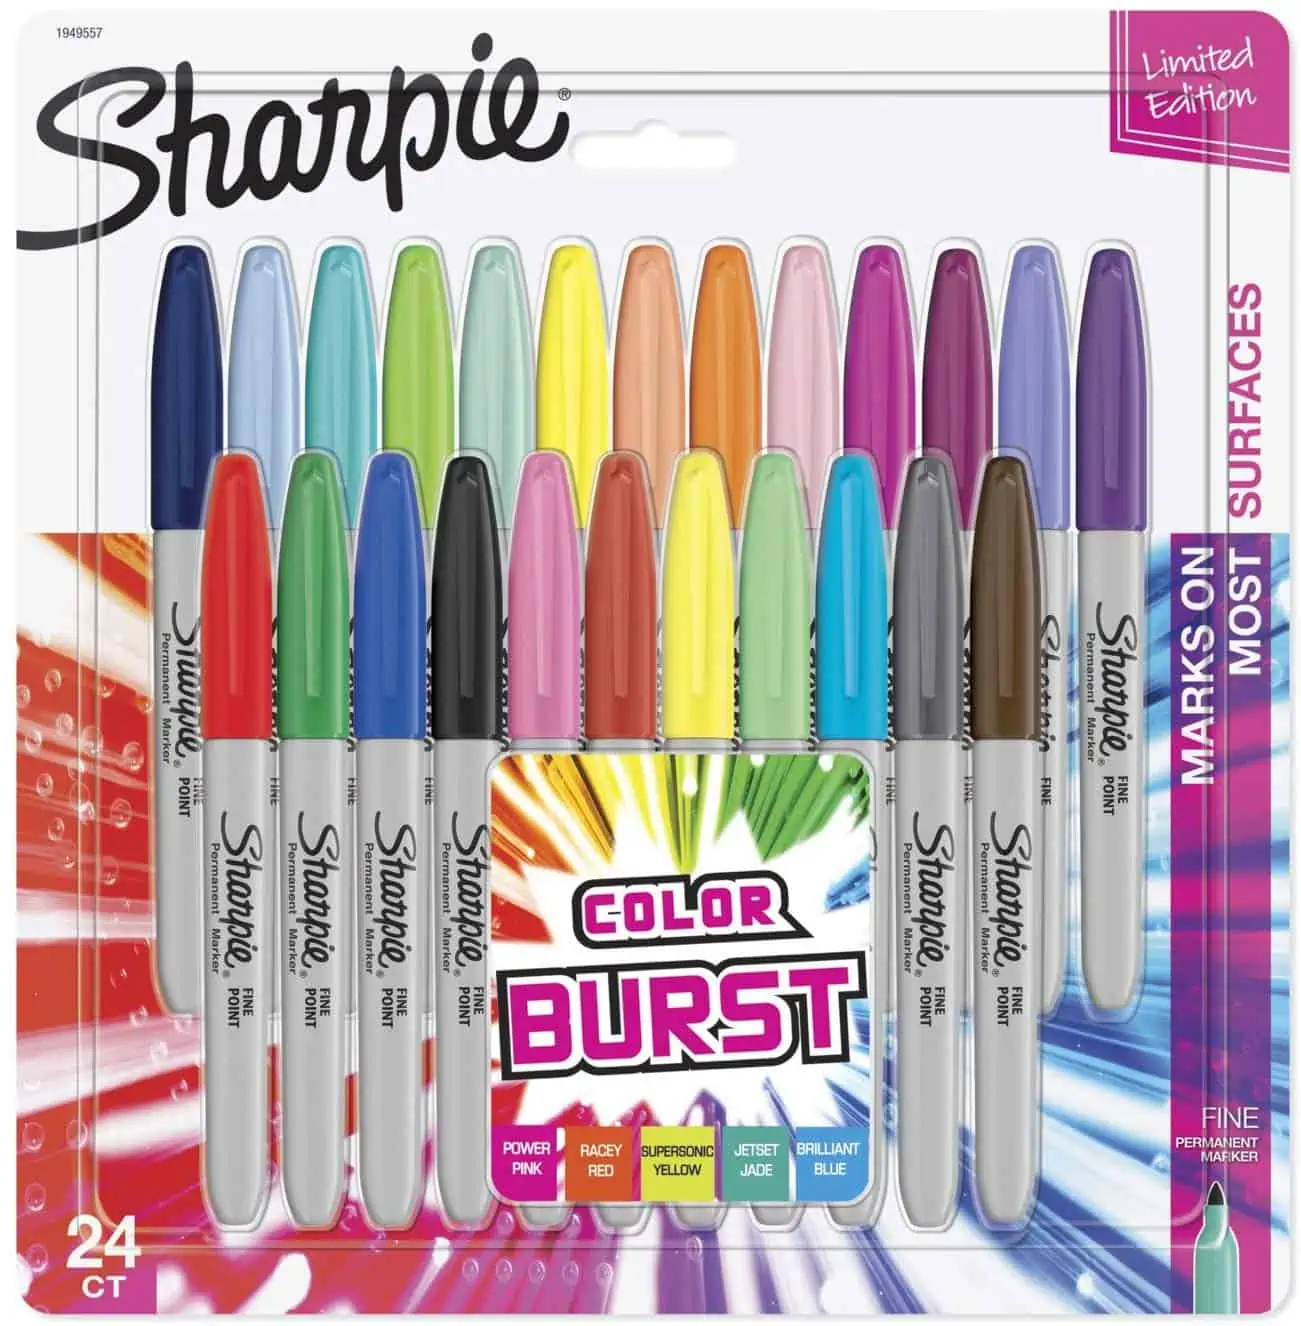 A variety of Sharpie markers from their color burst collection.